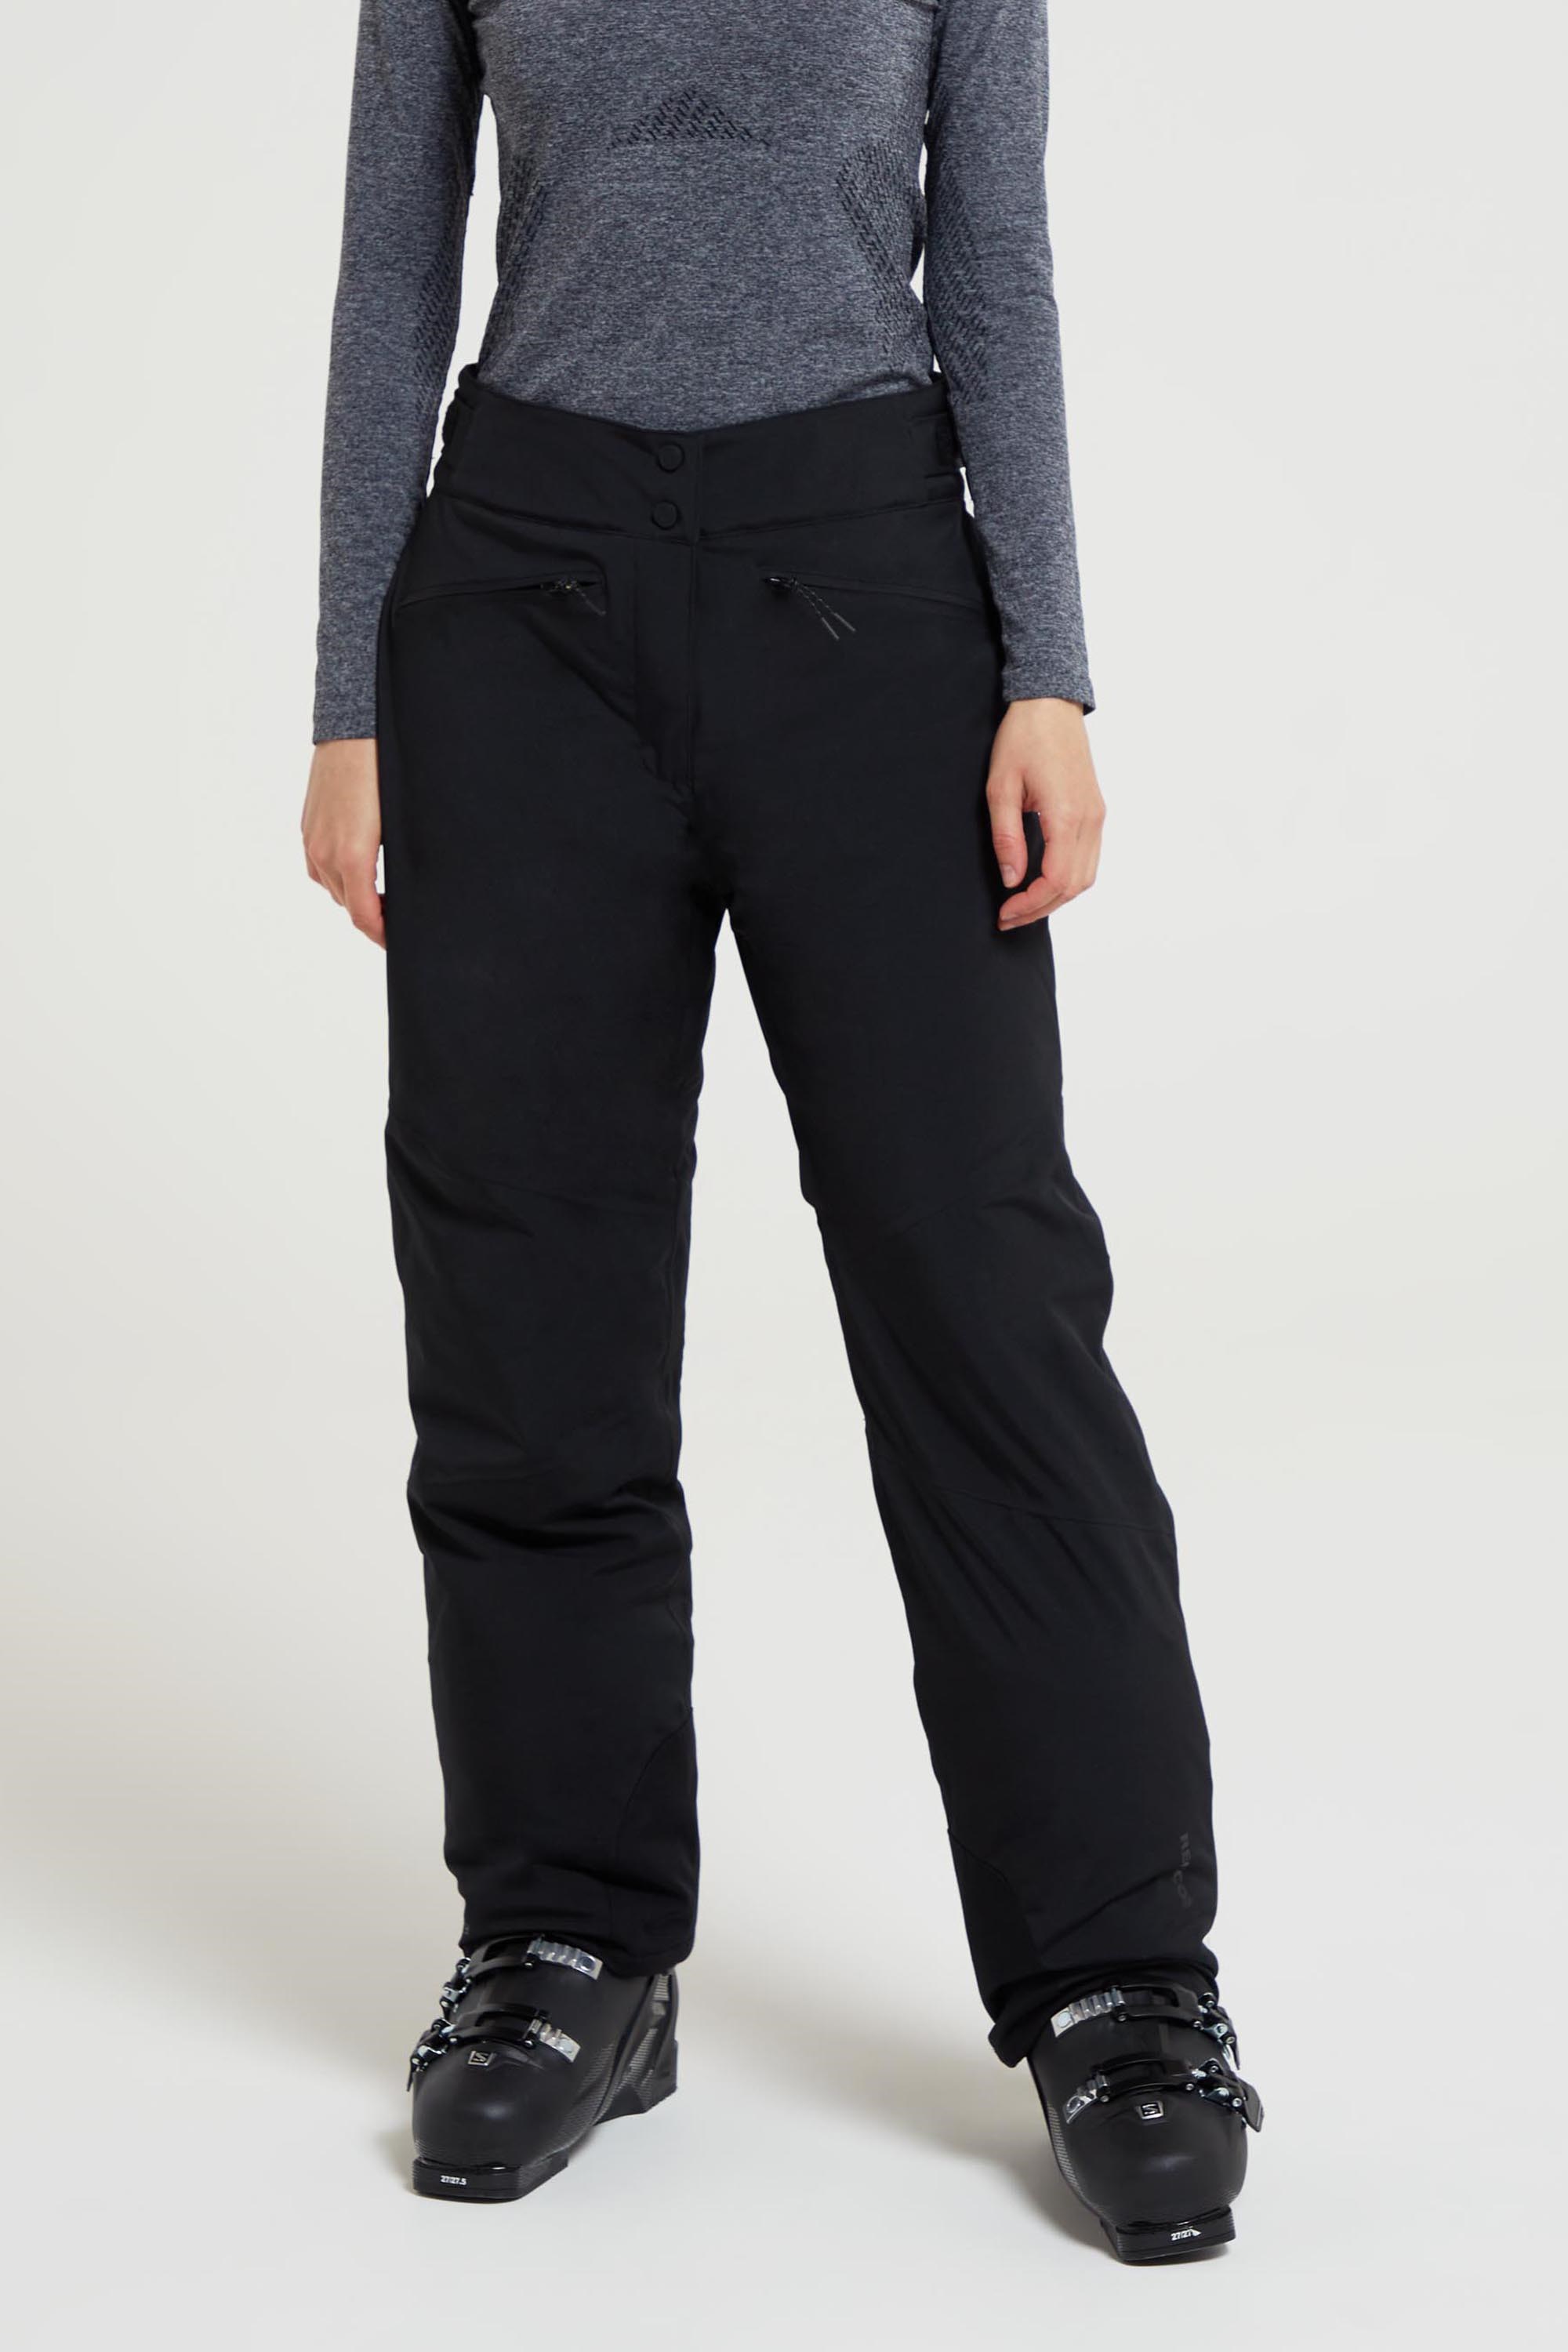 Mountain Warehouse Talus Women Thermal Baselayer Pants - Lightweight,  Breathable & Quick Drying Ladies Leggings - for Travel, Hiking, Camping,  Skiing, Snowboard Navy 6 : : Fashion